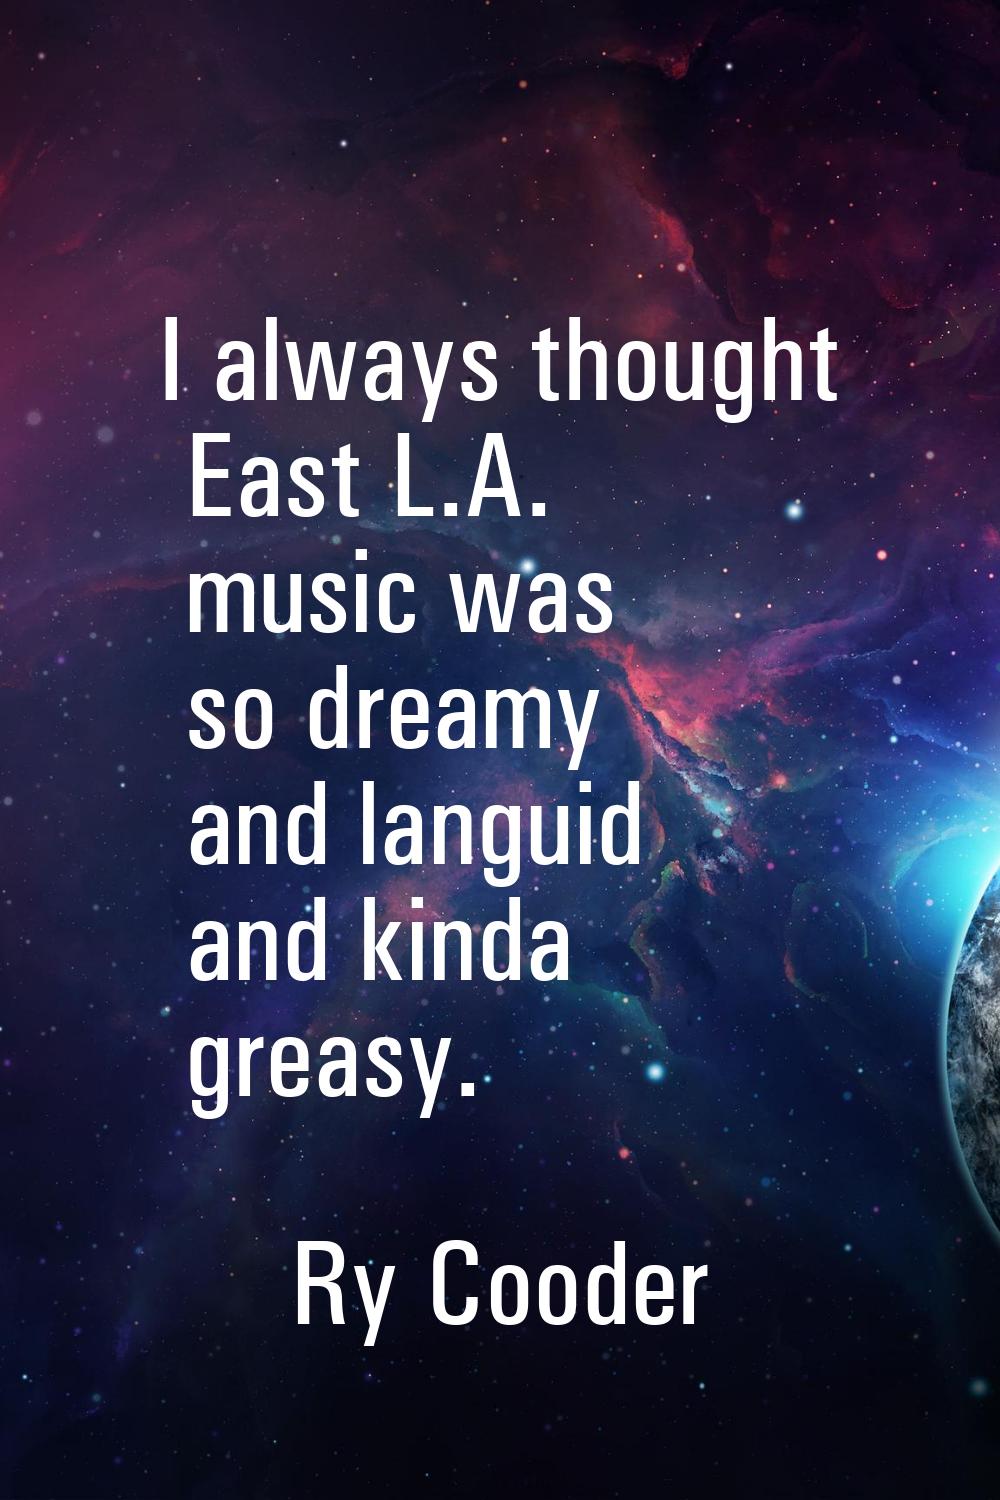 I always thought East L.A. music was so dreamy and languid and kinda greasy.